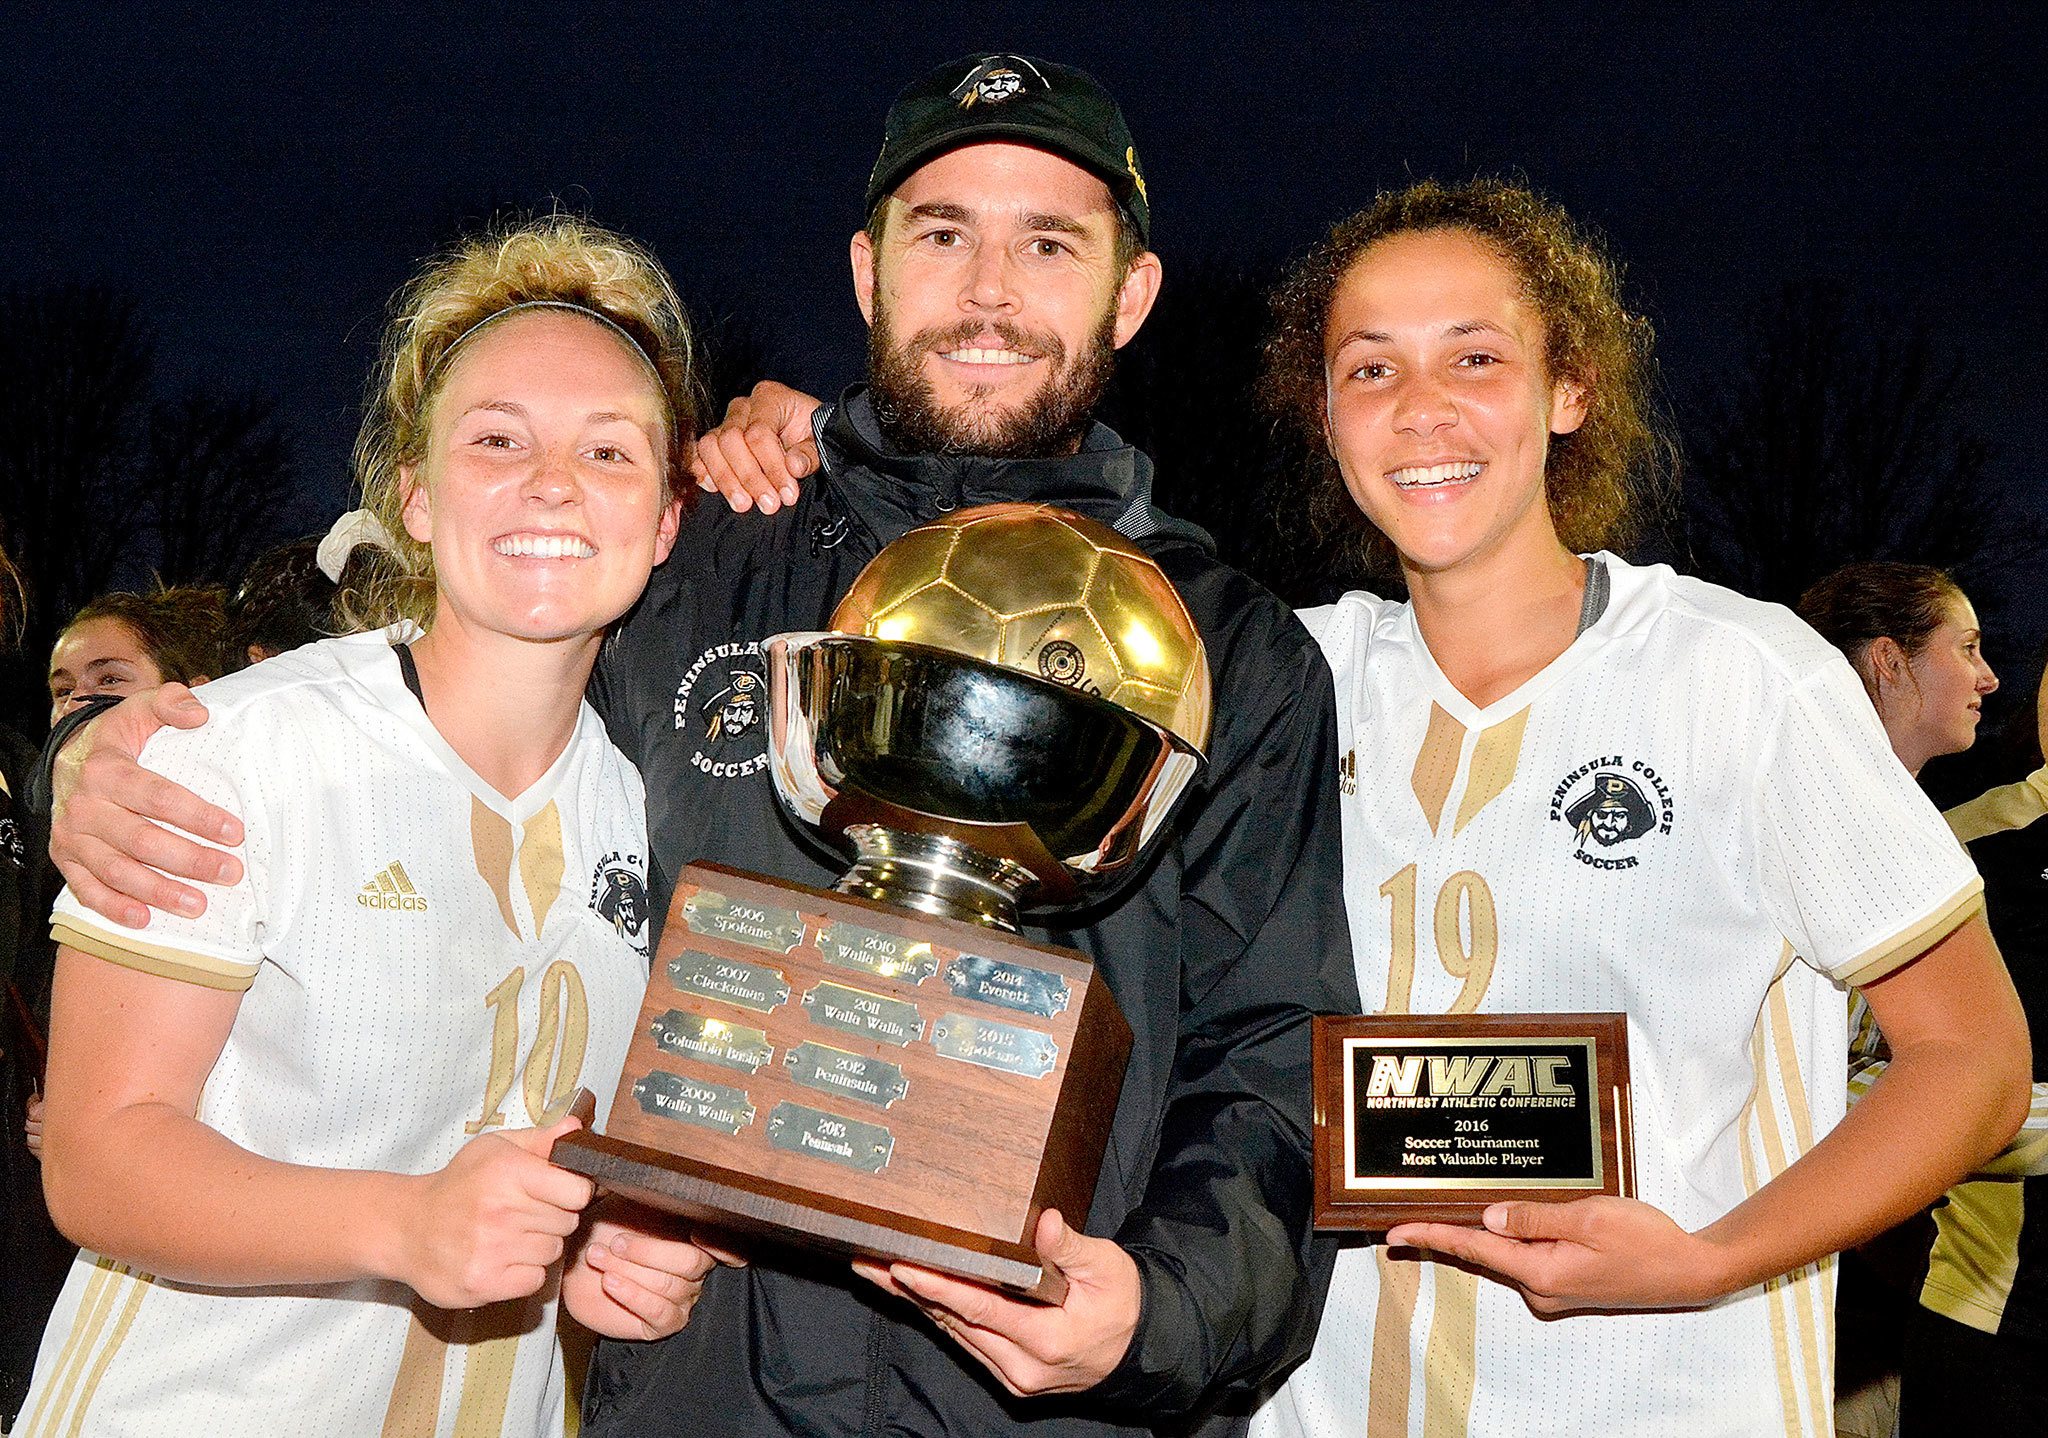 Peninsula College photo                                Peninsula women’s soccer coach Kanyon Anderson celebrates the Pirates’ NWAC championship Nov. 13 in Tukwila with players Kennady Whitehead, left, and Bri Valiente.